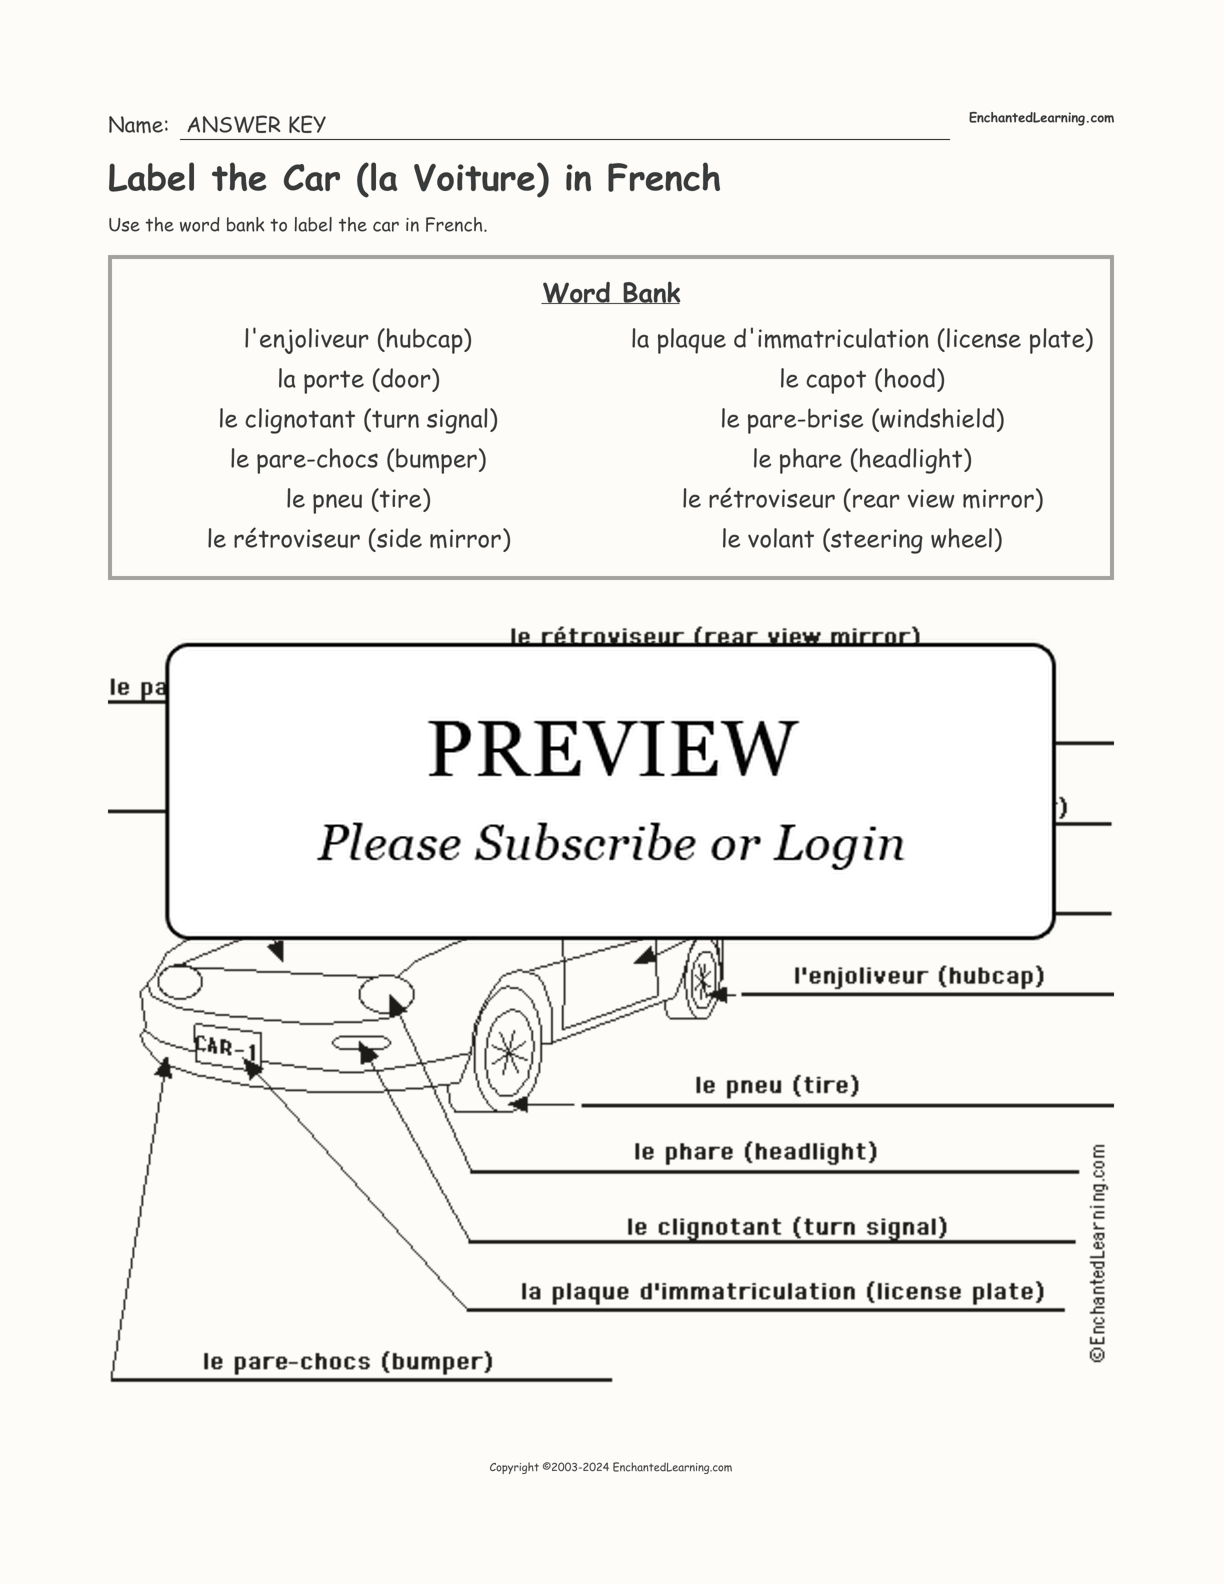 Label the Car (la Voiture) in French interactive worksheet page 2